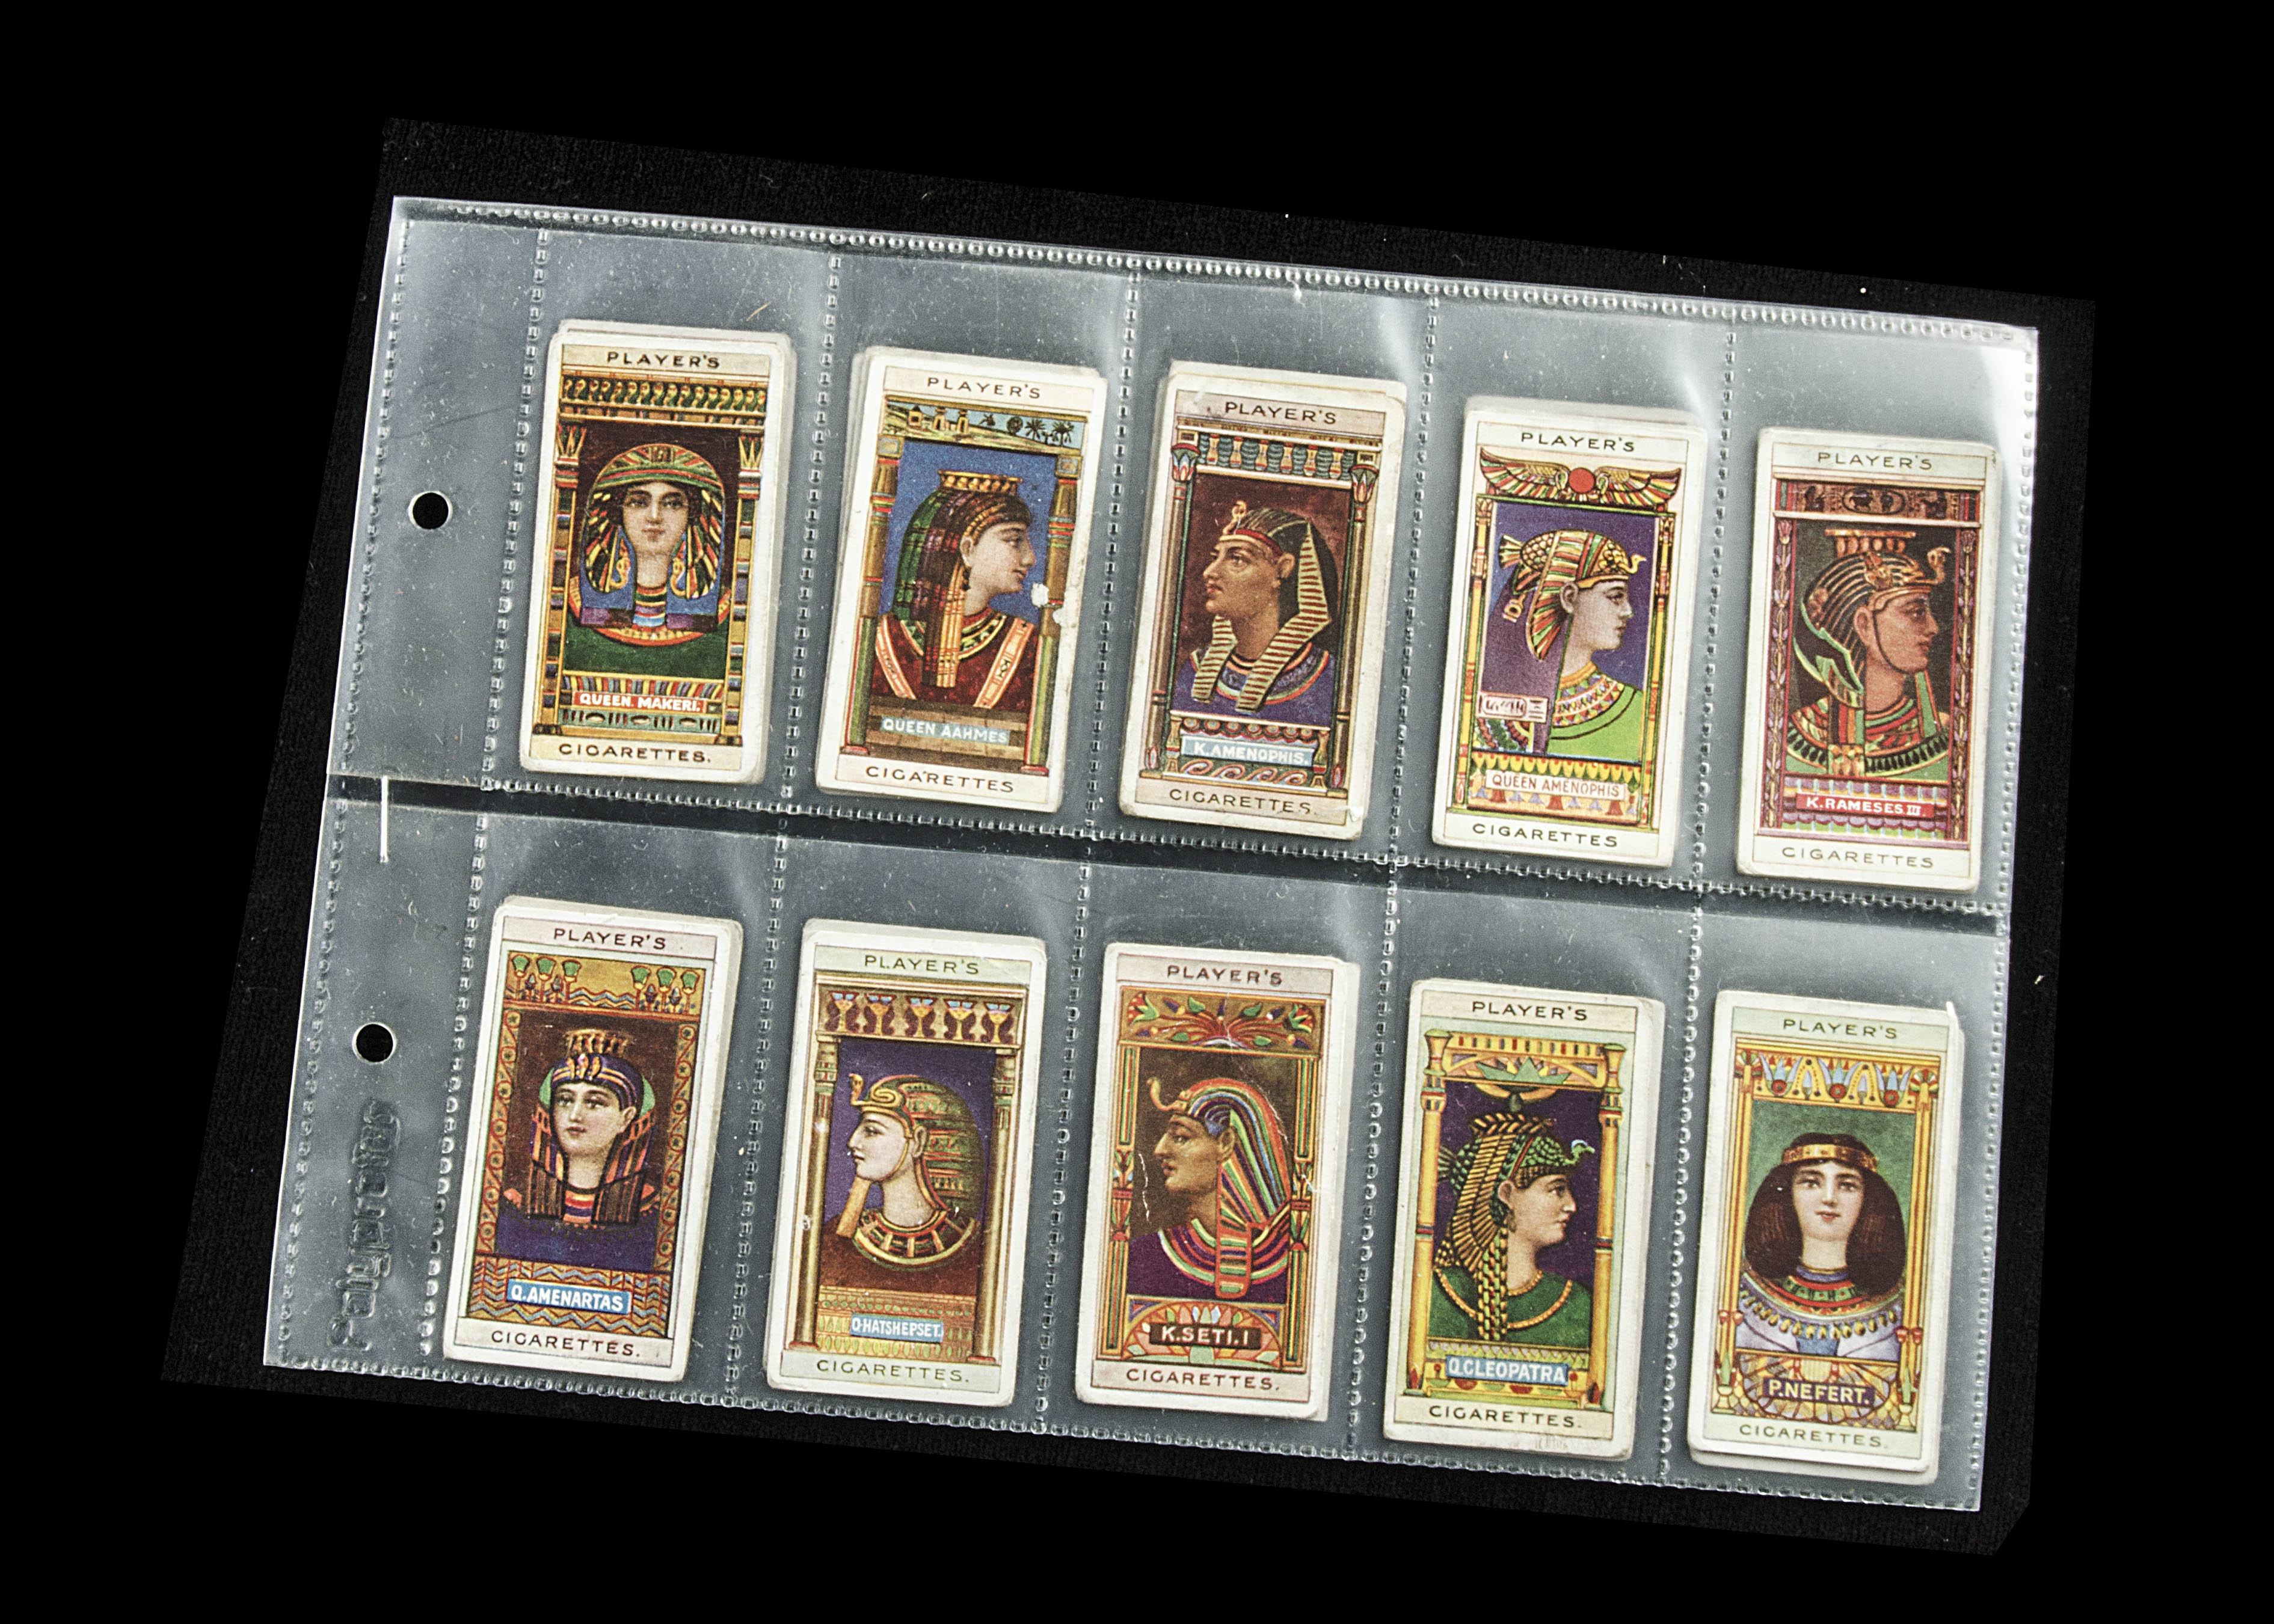 Cigarette Cards, Royalty, 3 Players sets, Egyptian Kings & Queens & Classical Deities, Coronation